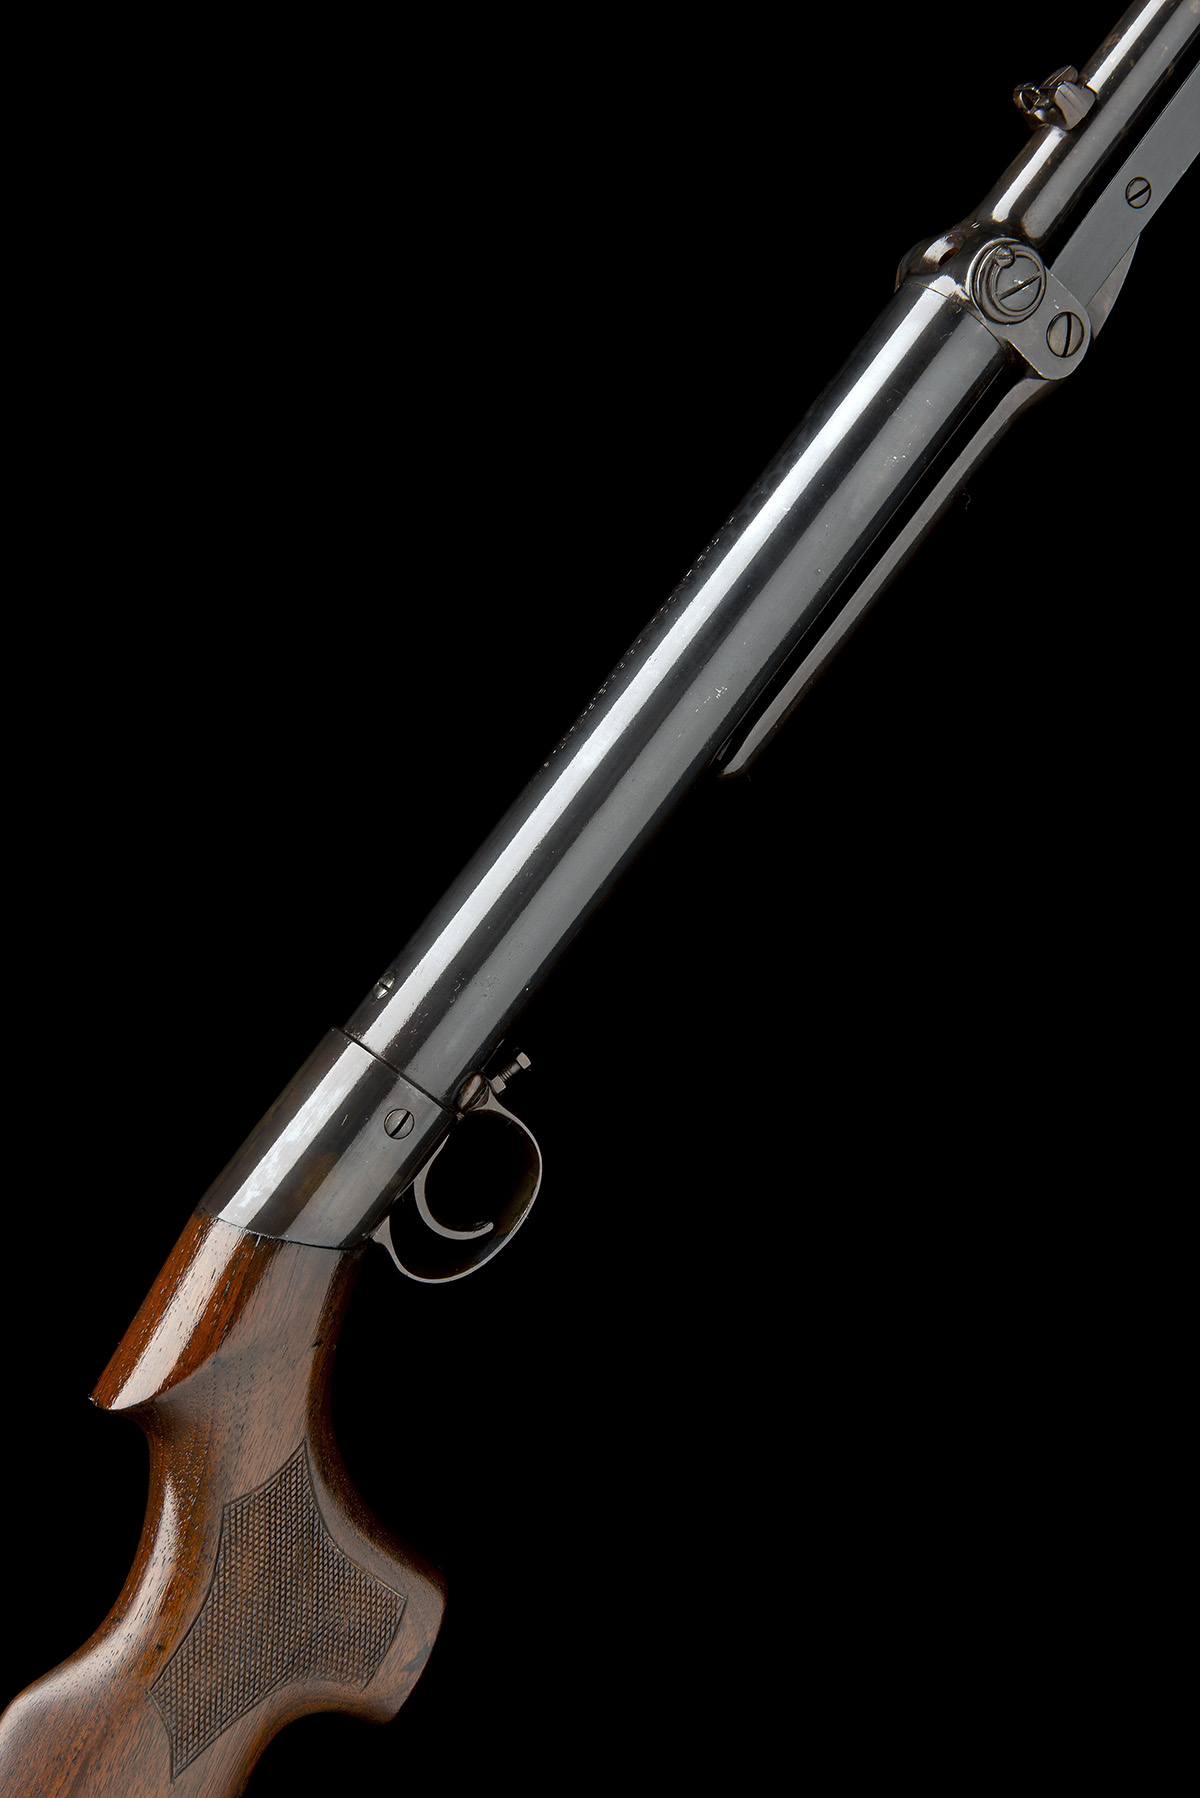 LINCOLN JEFFERIES, BIRMINGHAM A .177 UNDER-LEVER AIR-RIFLE, MODEL 'H. THE LINCOLN', serial no.